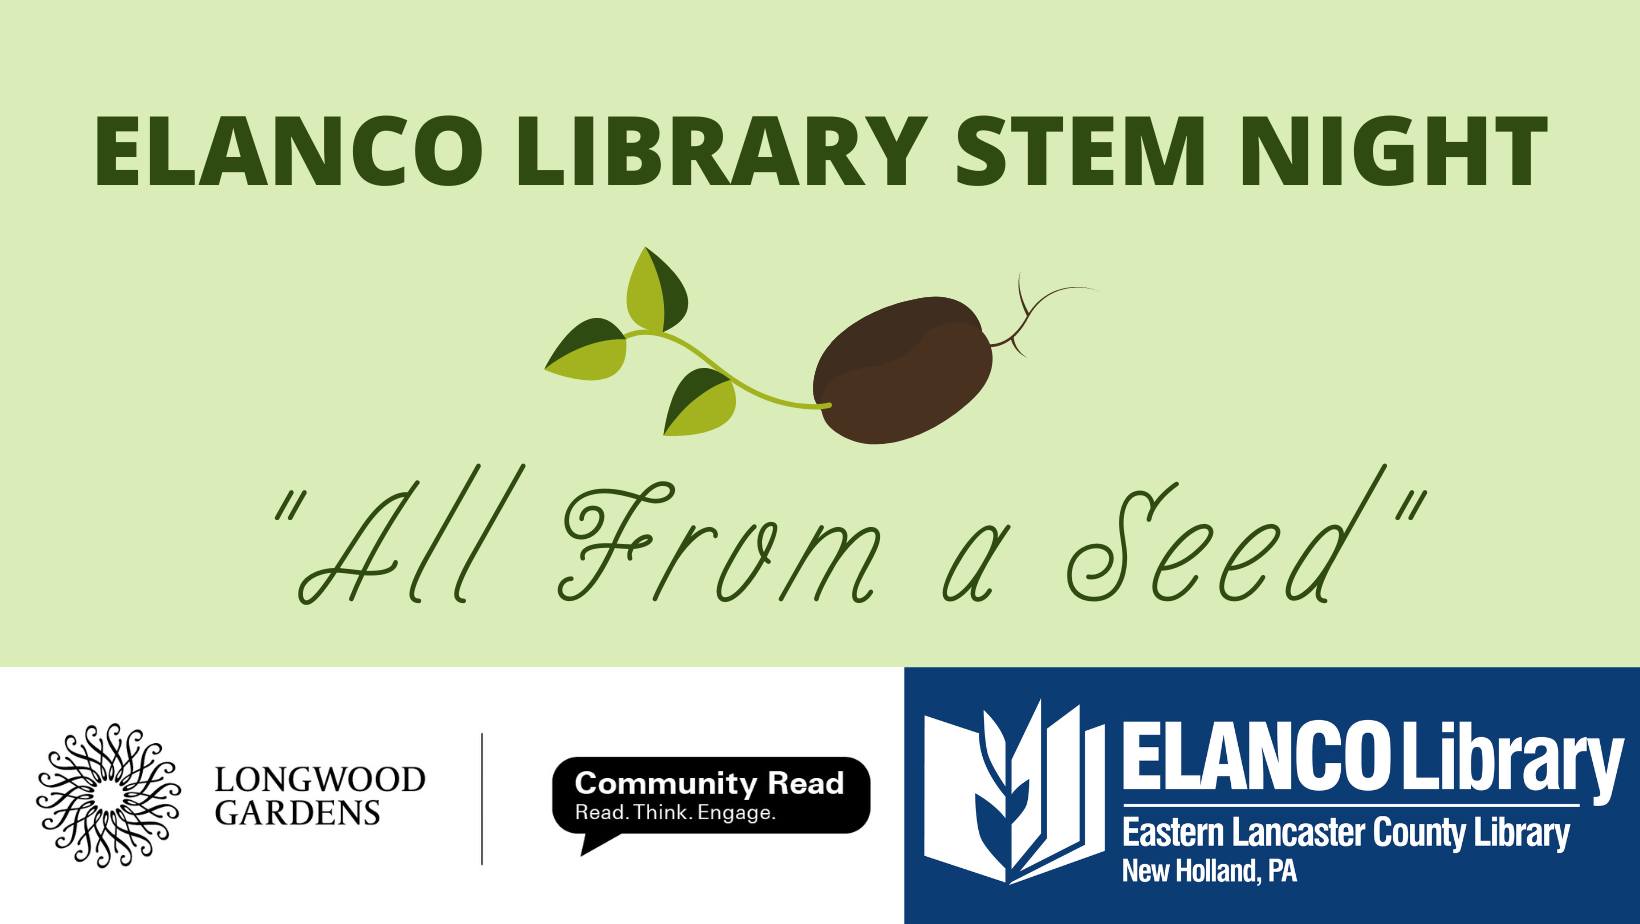 ELANCO Library STEM Night: All From a Seed